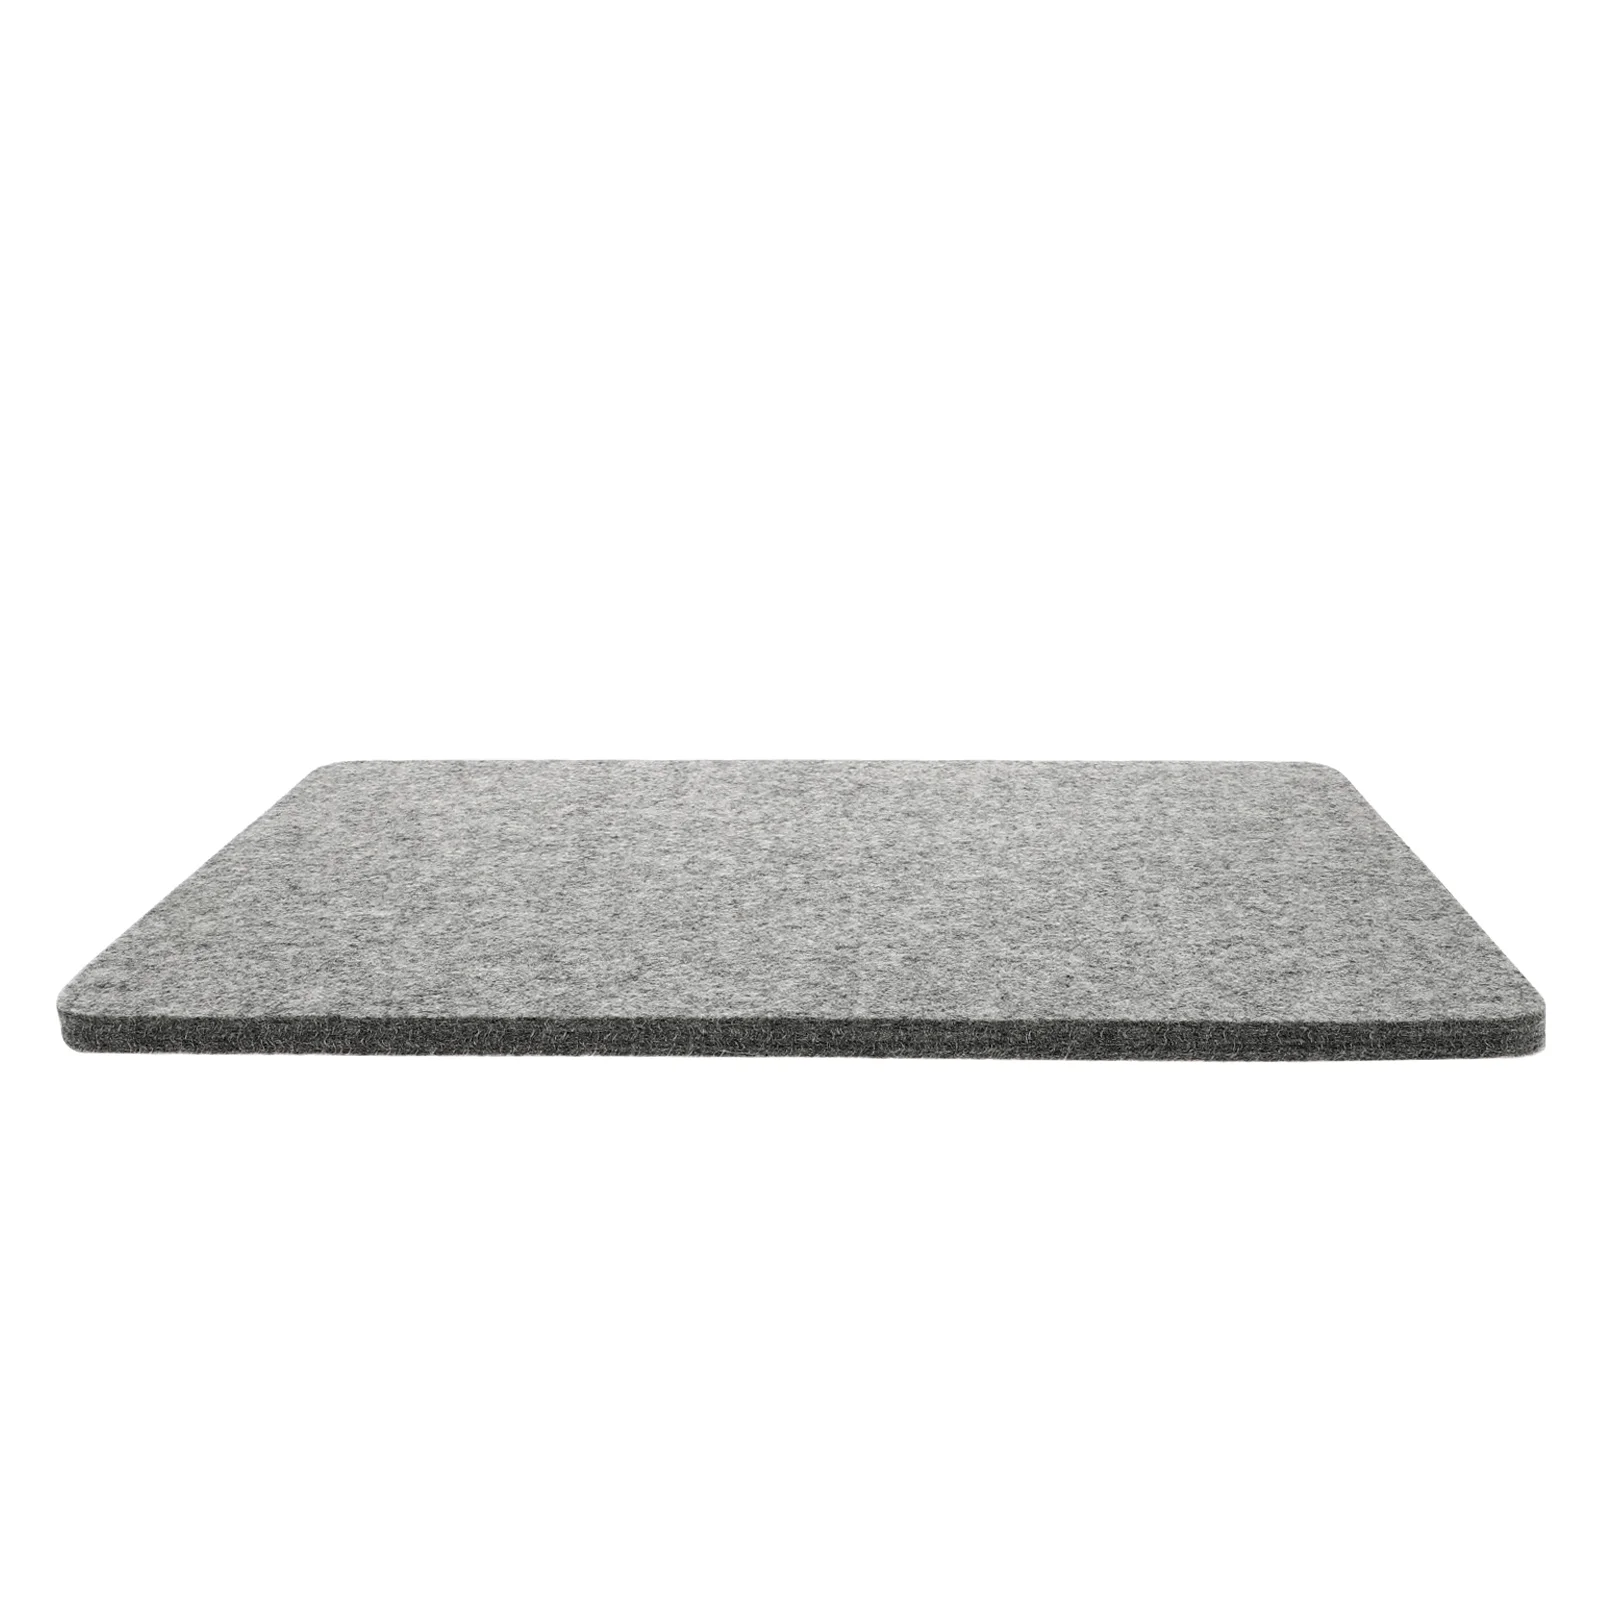 

High Temperature Resistant Ironing Board Pressing Mat Wool Felt Pad Table Top Supply Tabletop Clothes Anti-scald